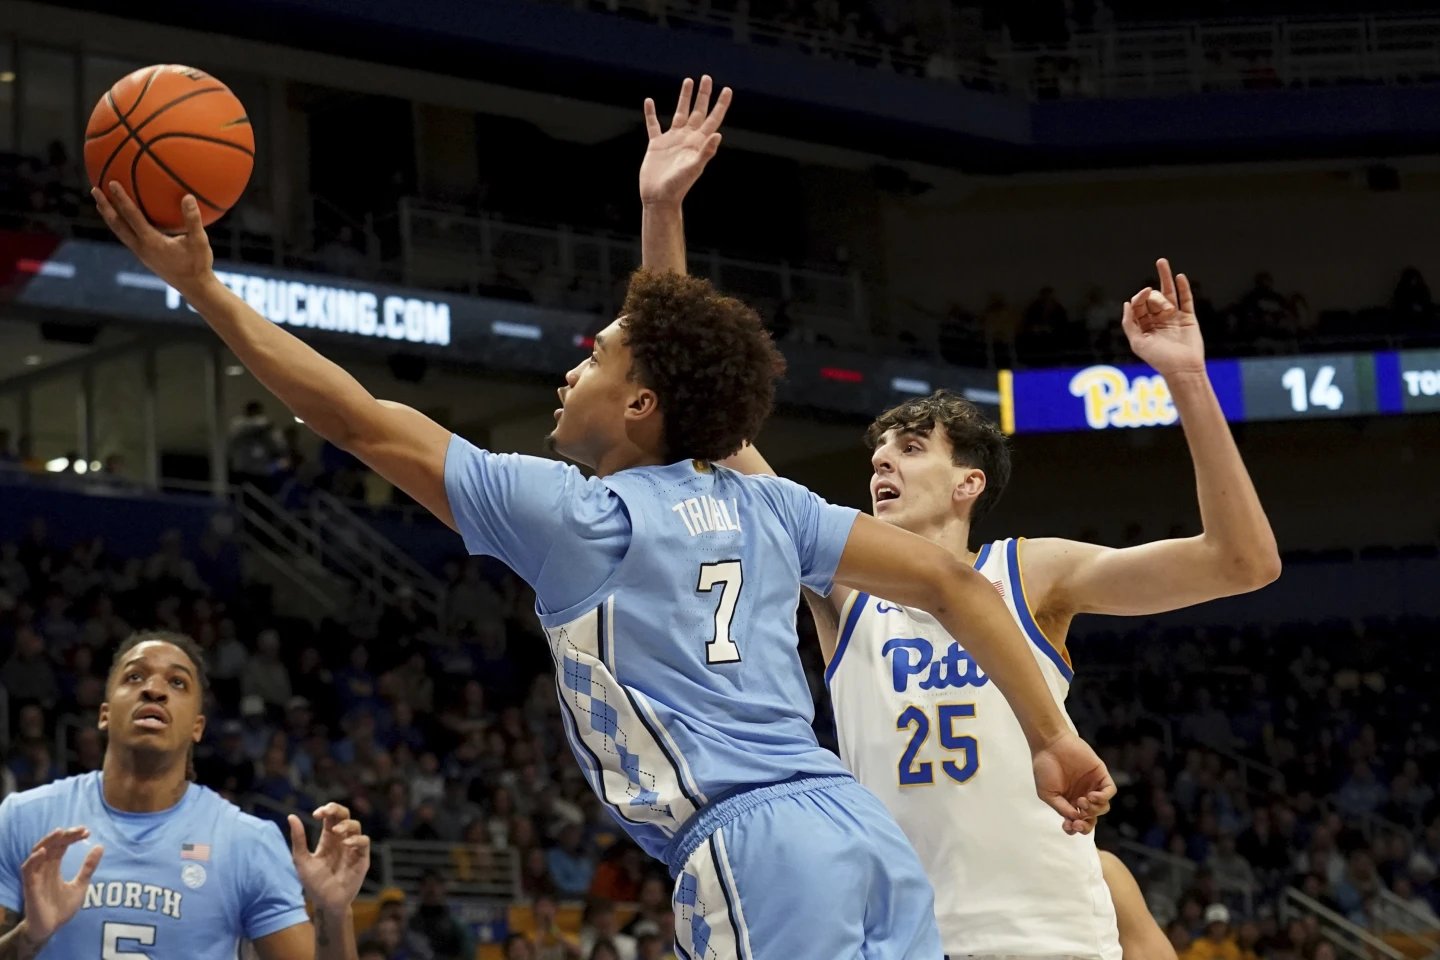 With Quad 1 victory at Pittsburgh, UNC Basketball jumps seven spots in NET rankings